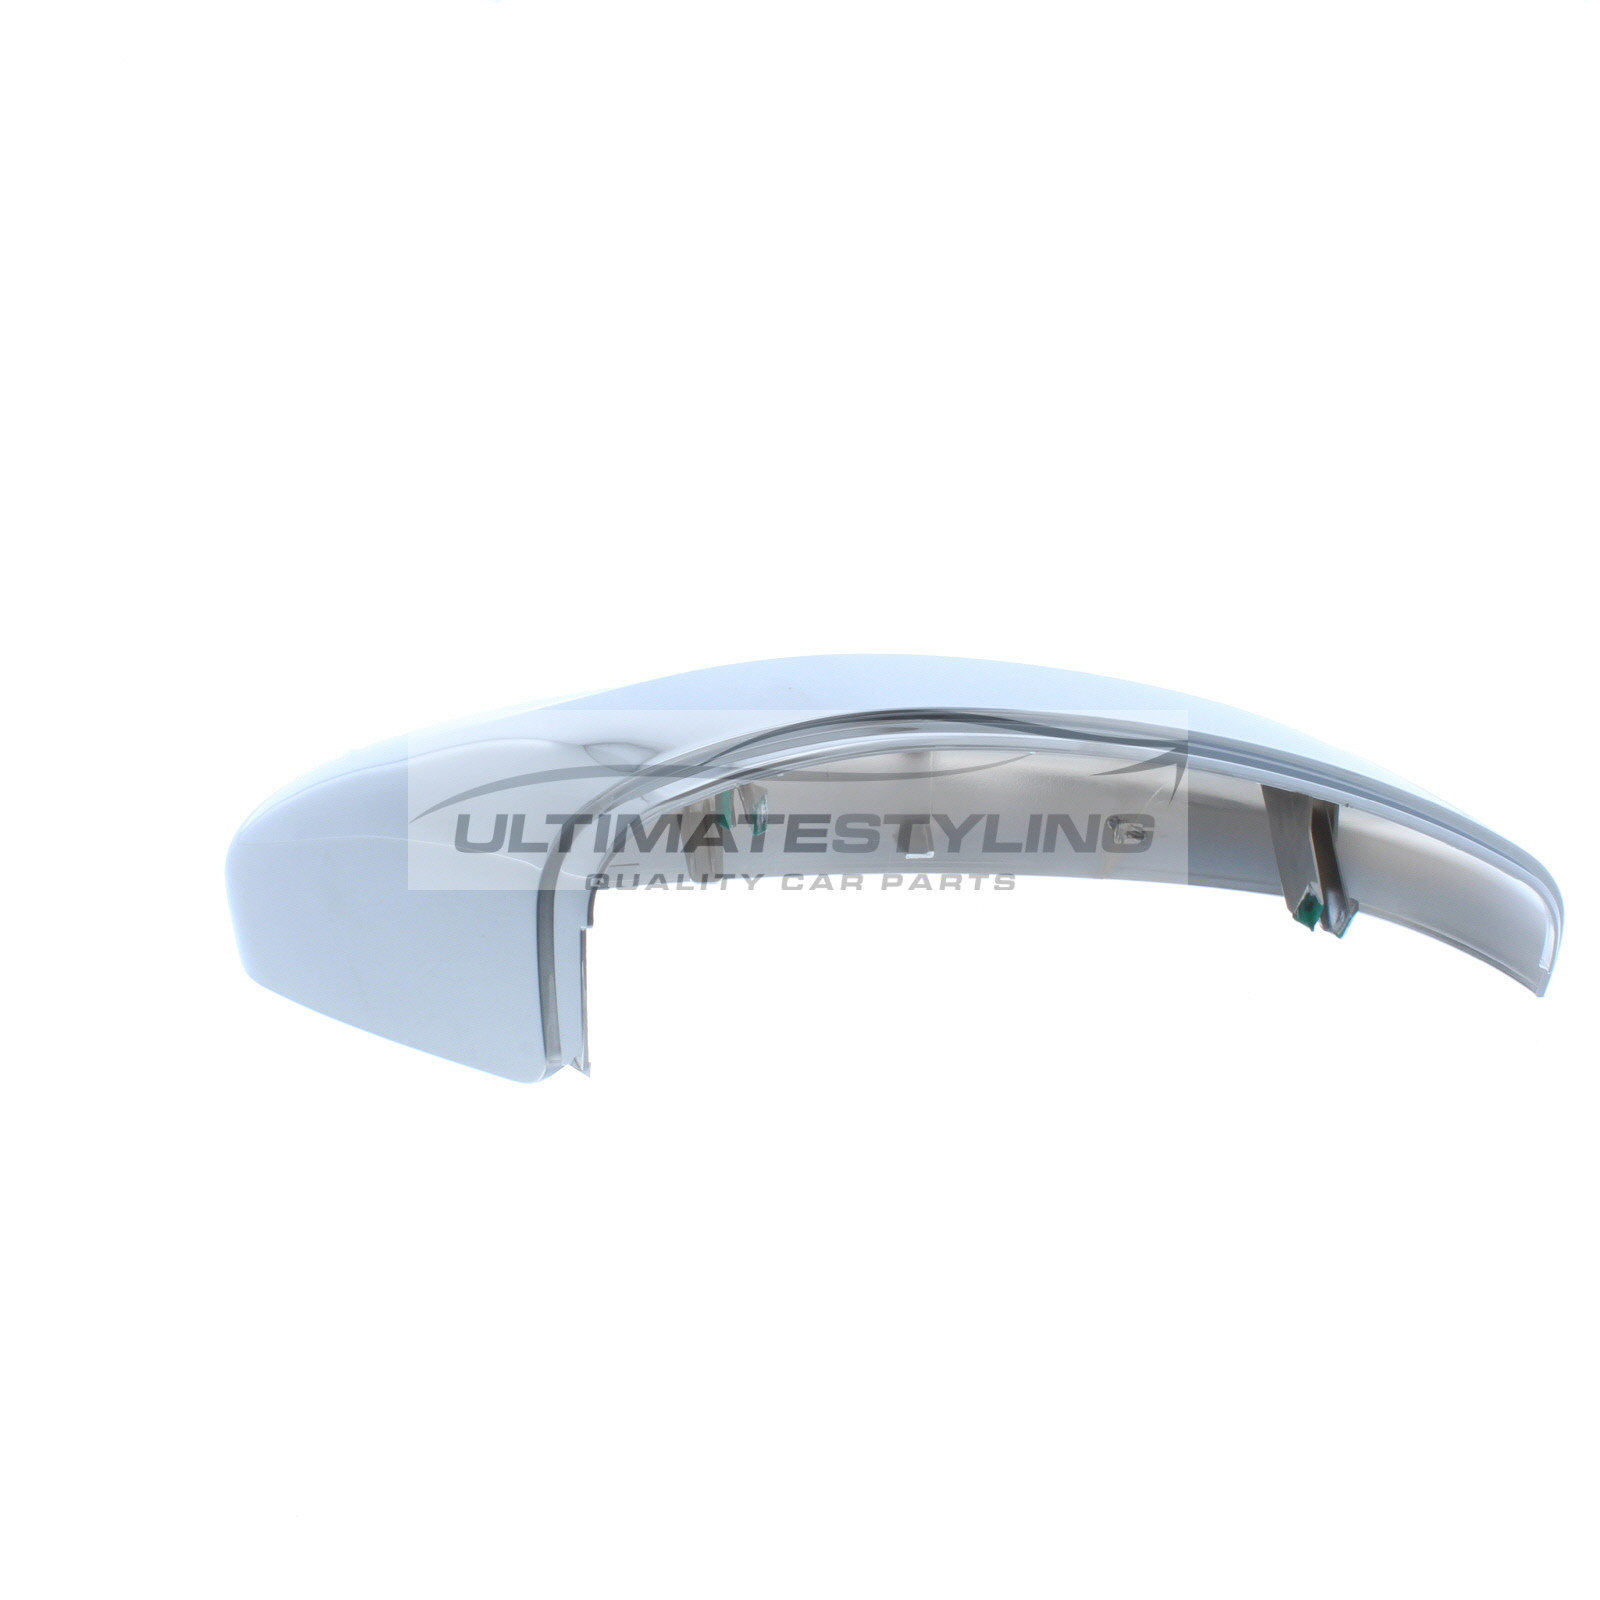 Peugeot 2008 2013-2020 Wing Mirror Cover Cap Casing Chrome Finish Drivers  Side (RH)